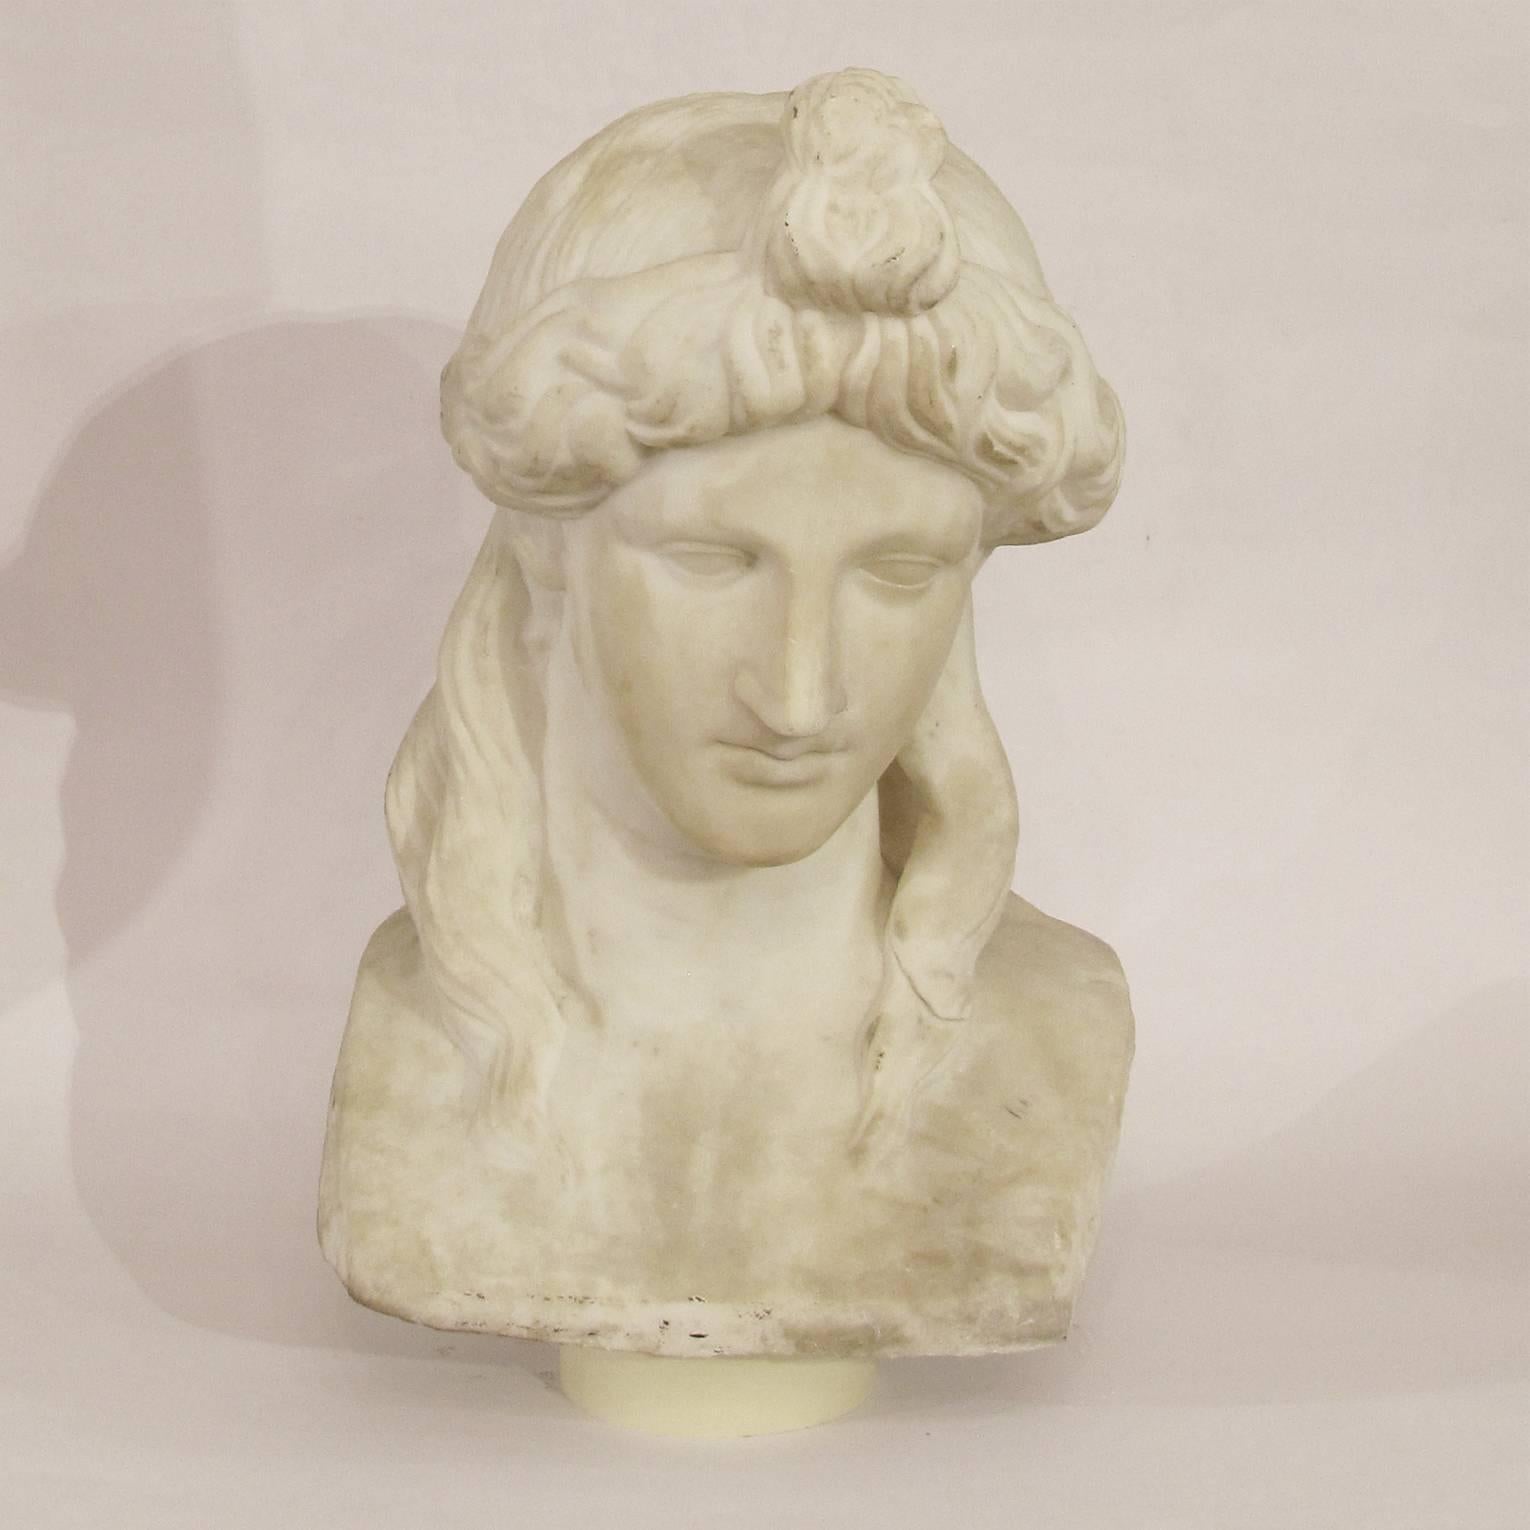 A carved white marble bust of Antinous, depicted with head lowered and turned slightly to sinister.
Italian manufactory from the late 18th century
Antinous (27 November, c. 111 – before 30 October 130) was a Bithynian Greek youth and a favourite,